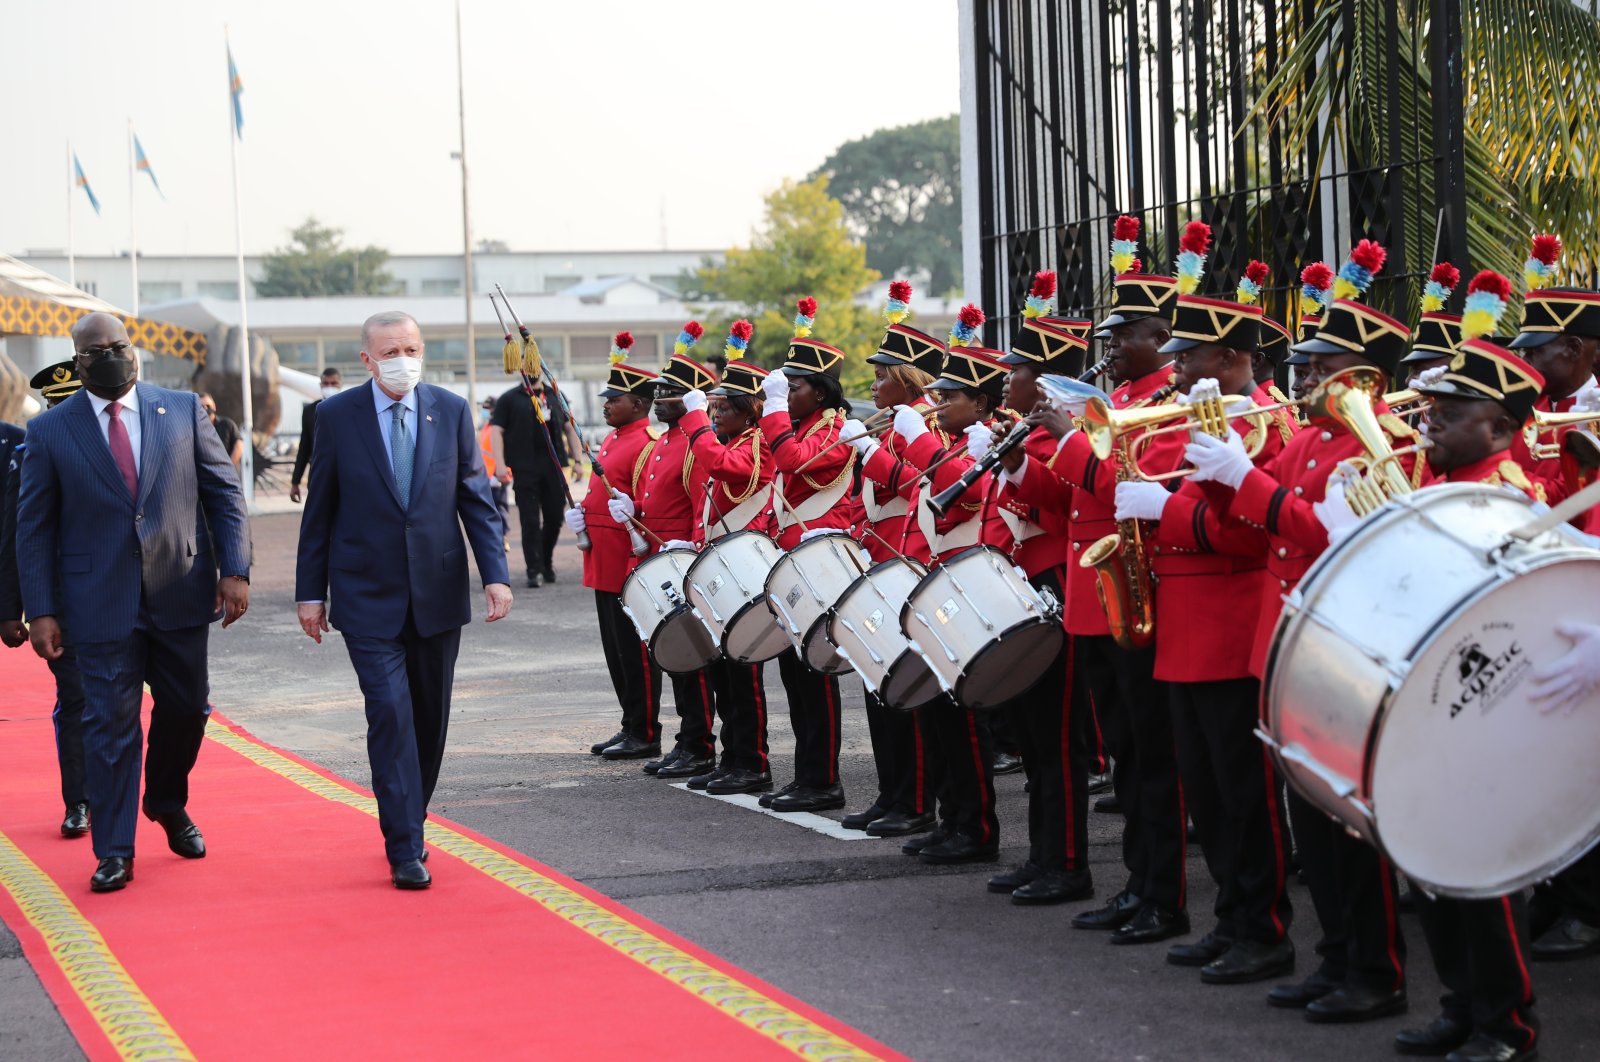 President Recep Tayyip Erdoğan welcomed in an official ceremony in Kinshasa, the Democratic Republic of Congo, Feb. 20, 2022. (IHA Photo)